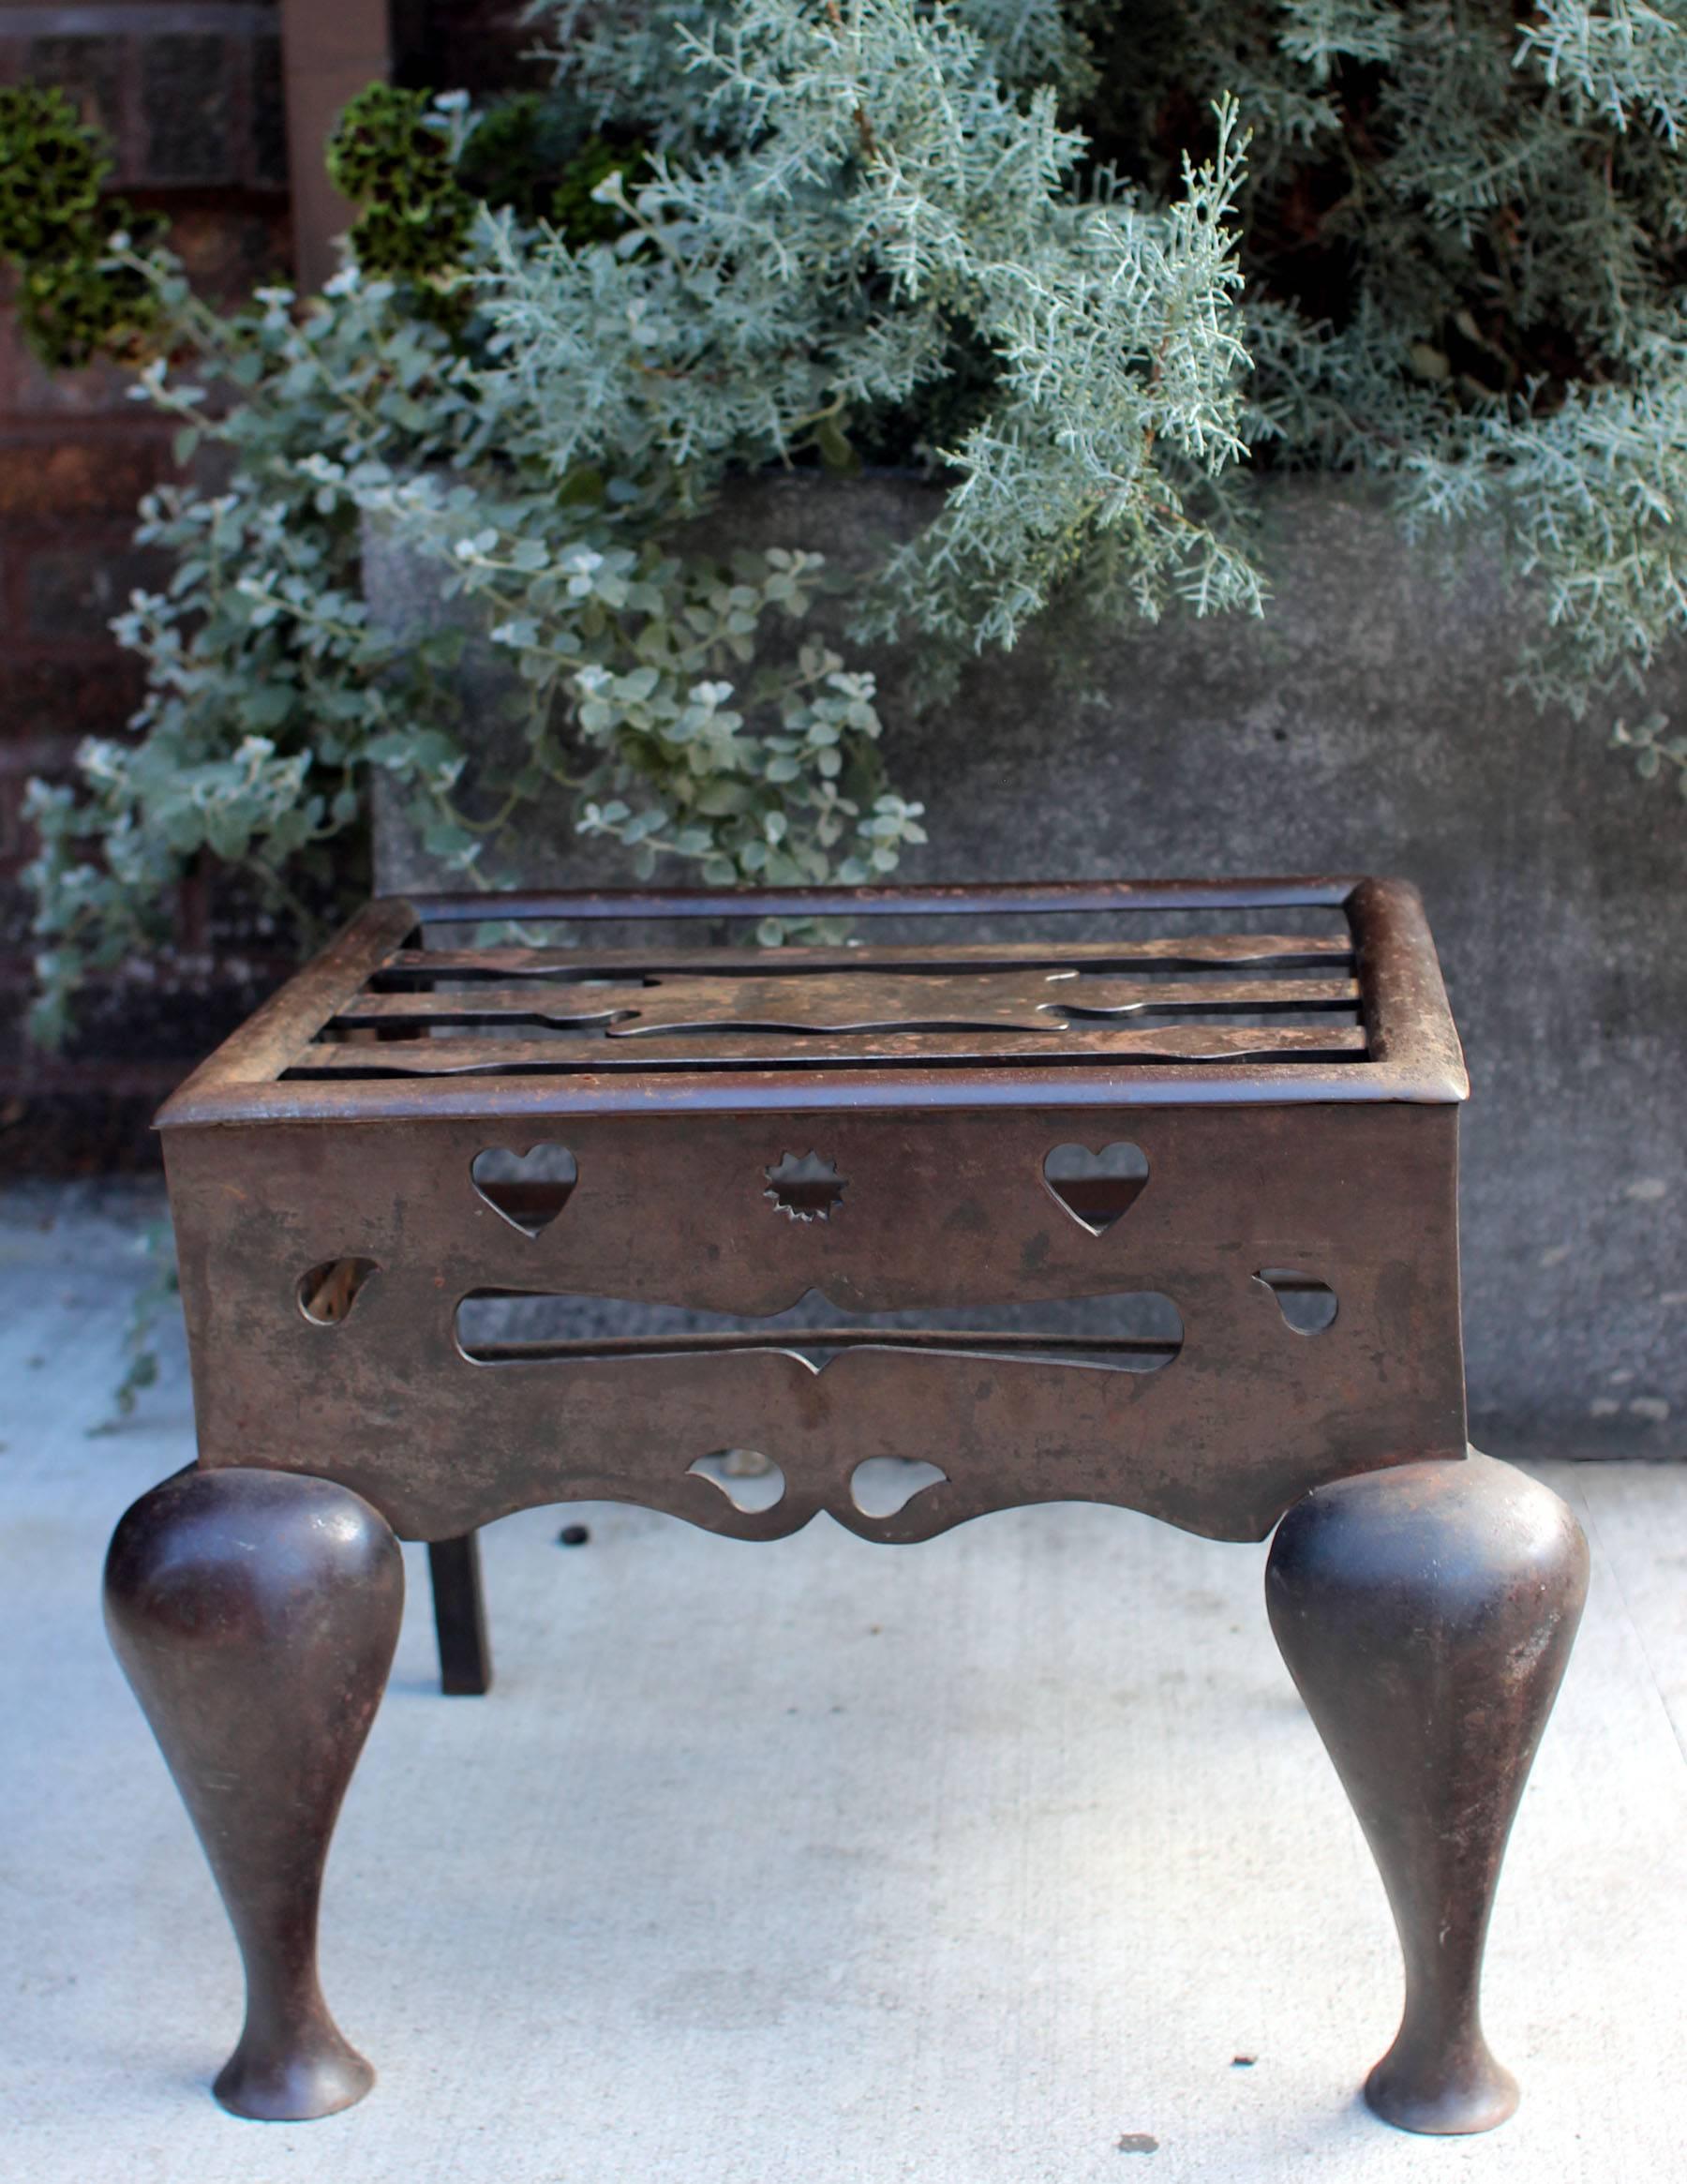 Heavy steel footman's trivet with cut decorations including hearts and handles, mid-19th century. Would work well as a small and low table. Very sturdy. Tabletop measures 12.5